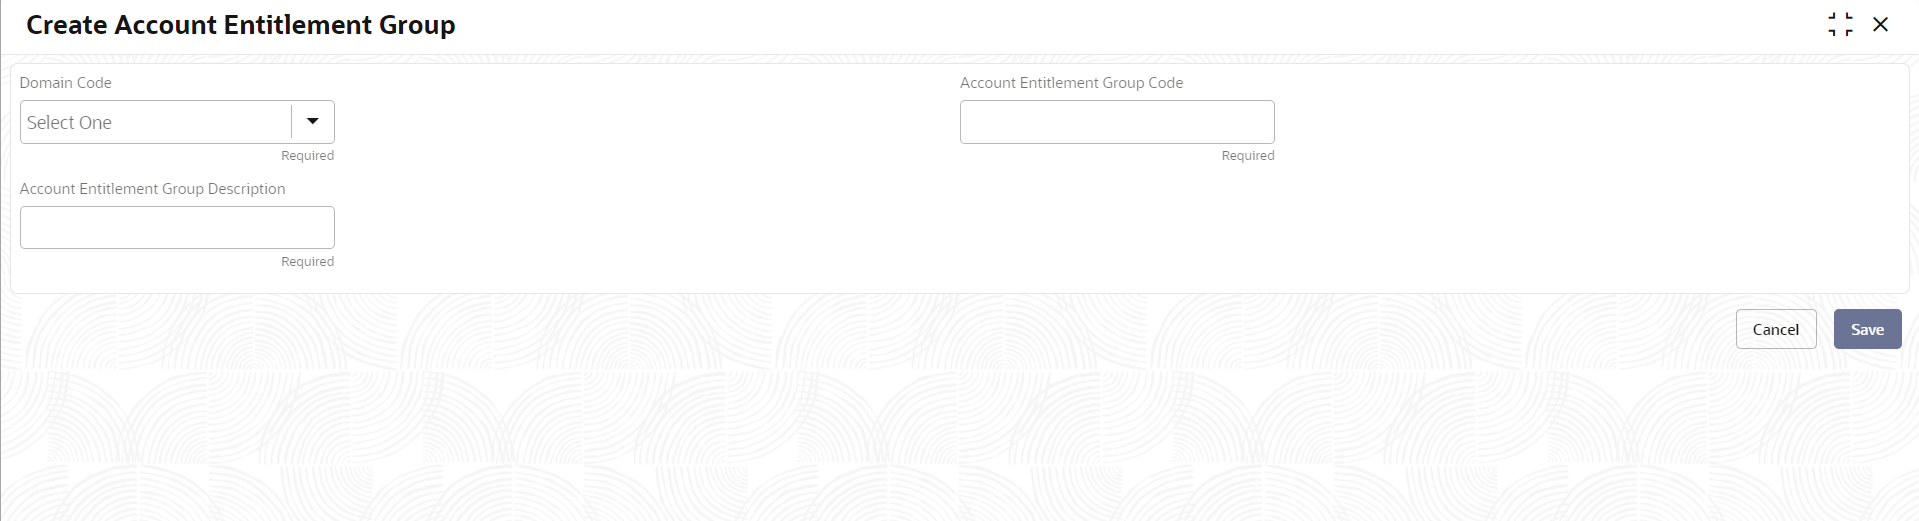 Create Account Entitlement Group